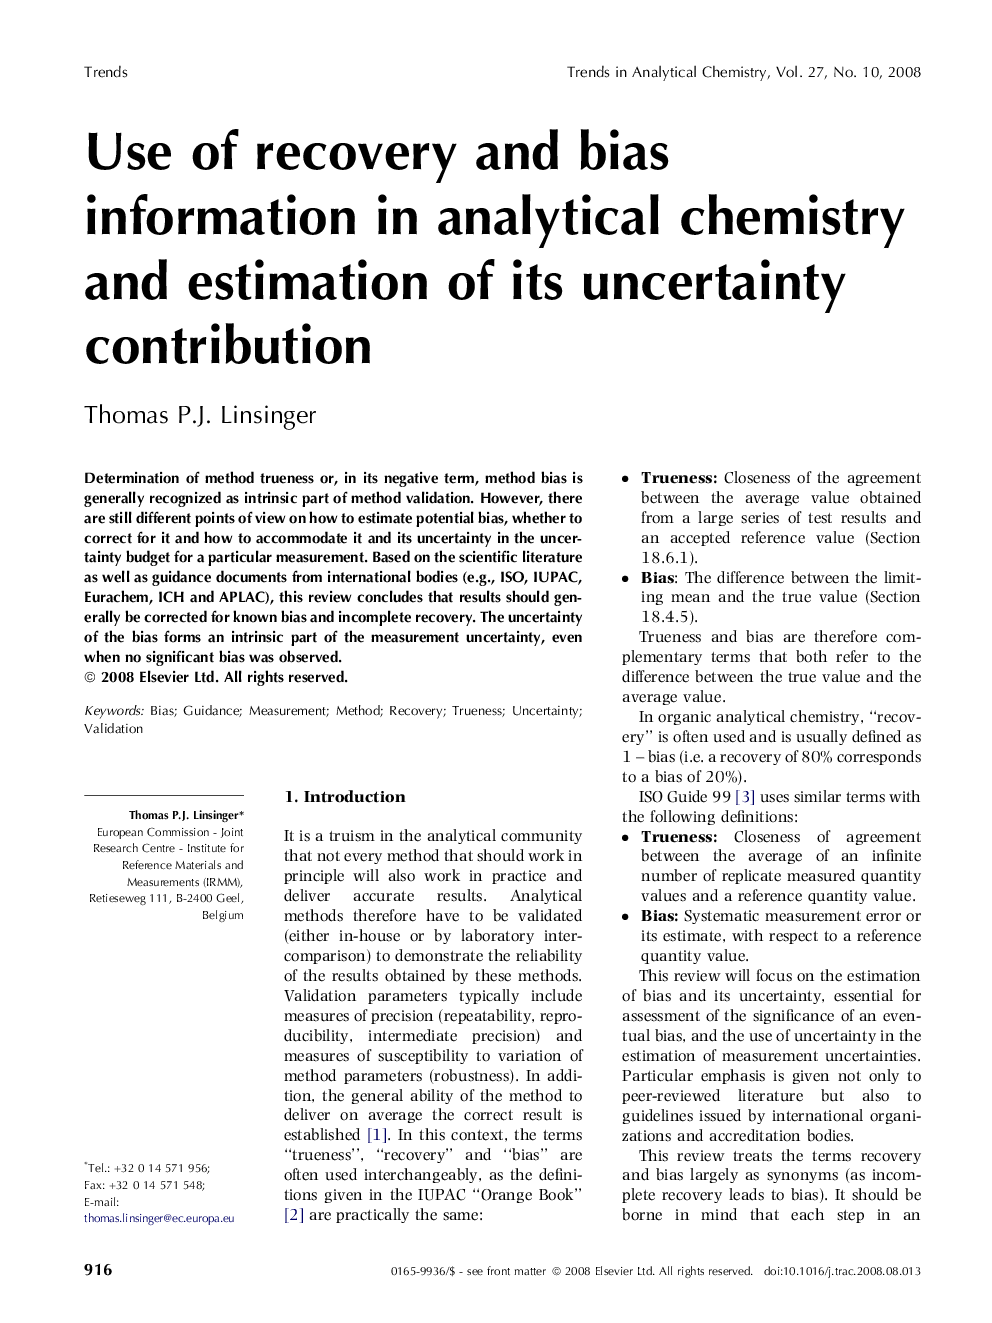 Use of recovery and bias information in analytical chemistry and estimation of its uncertainty contribution